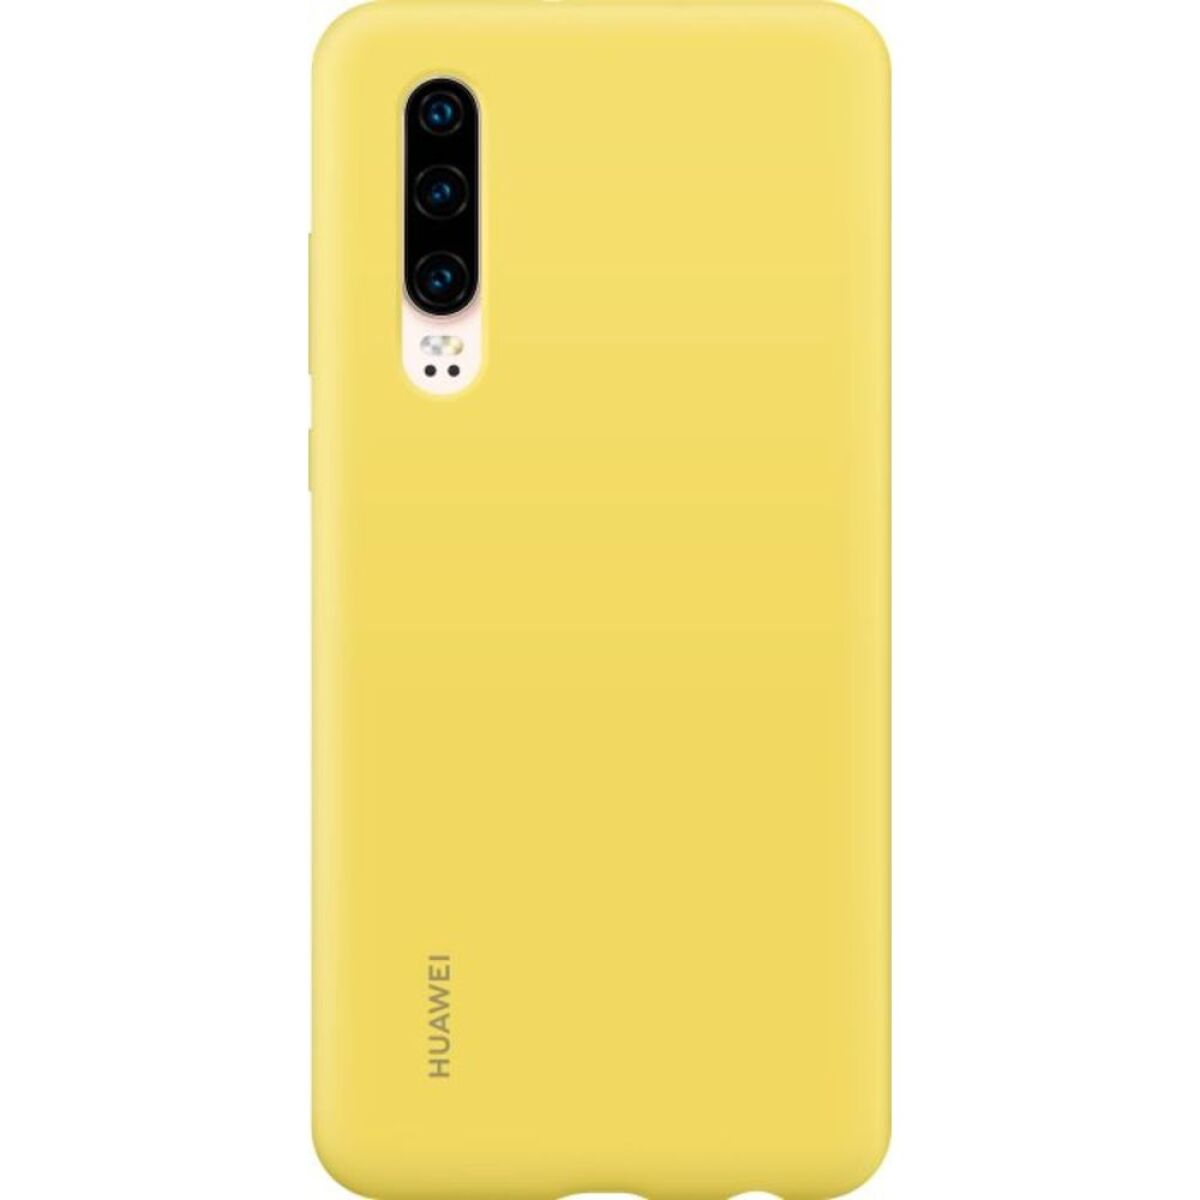 HUAWEI Silicon Case P30 Huawei, Gelb P30, yellow, Bookcover